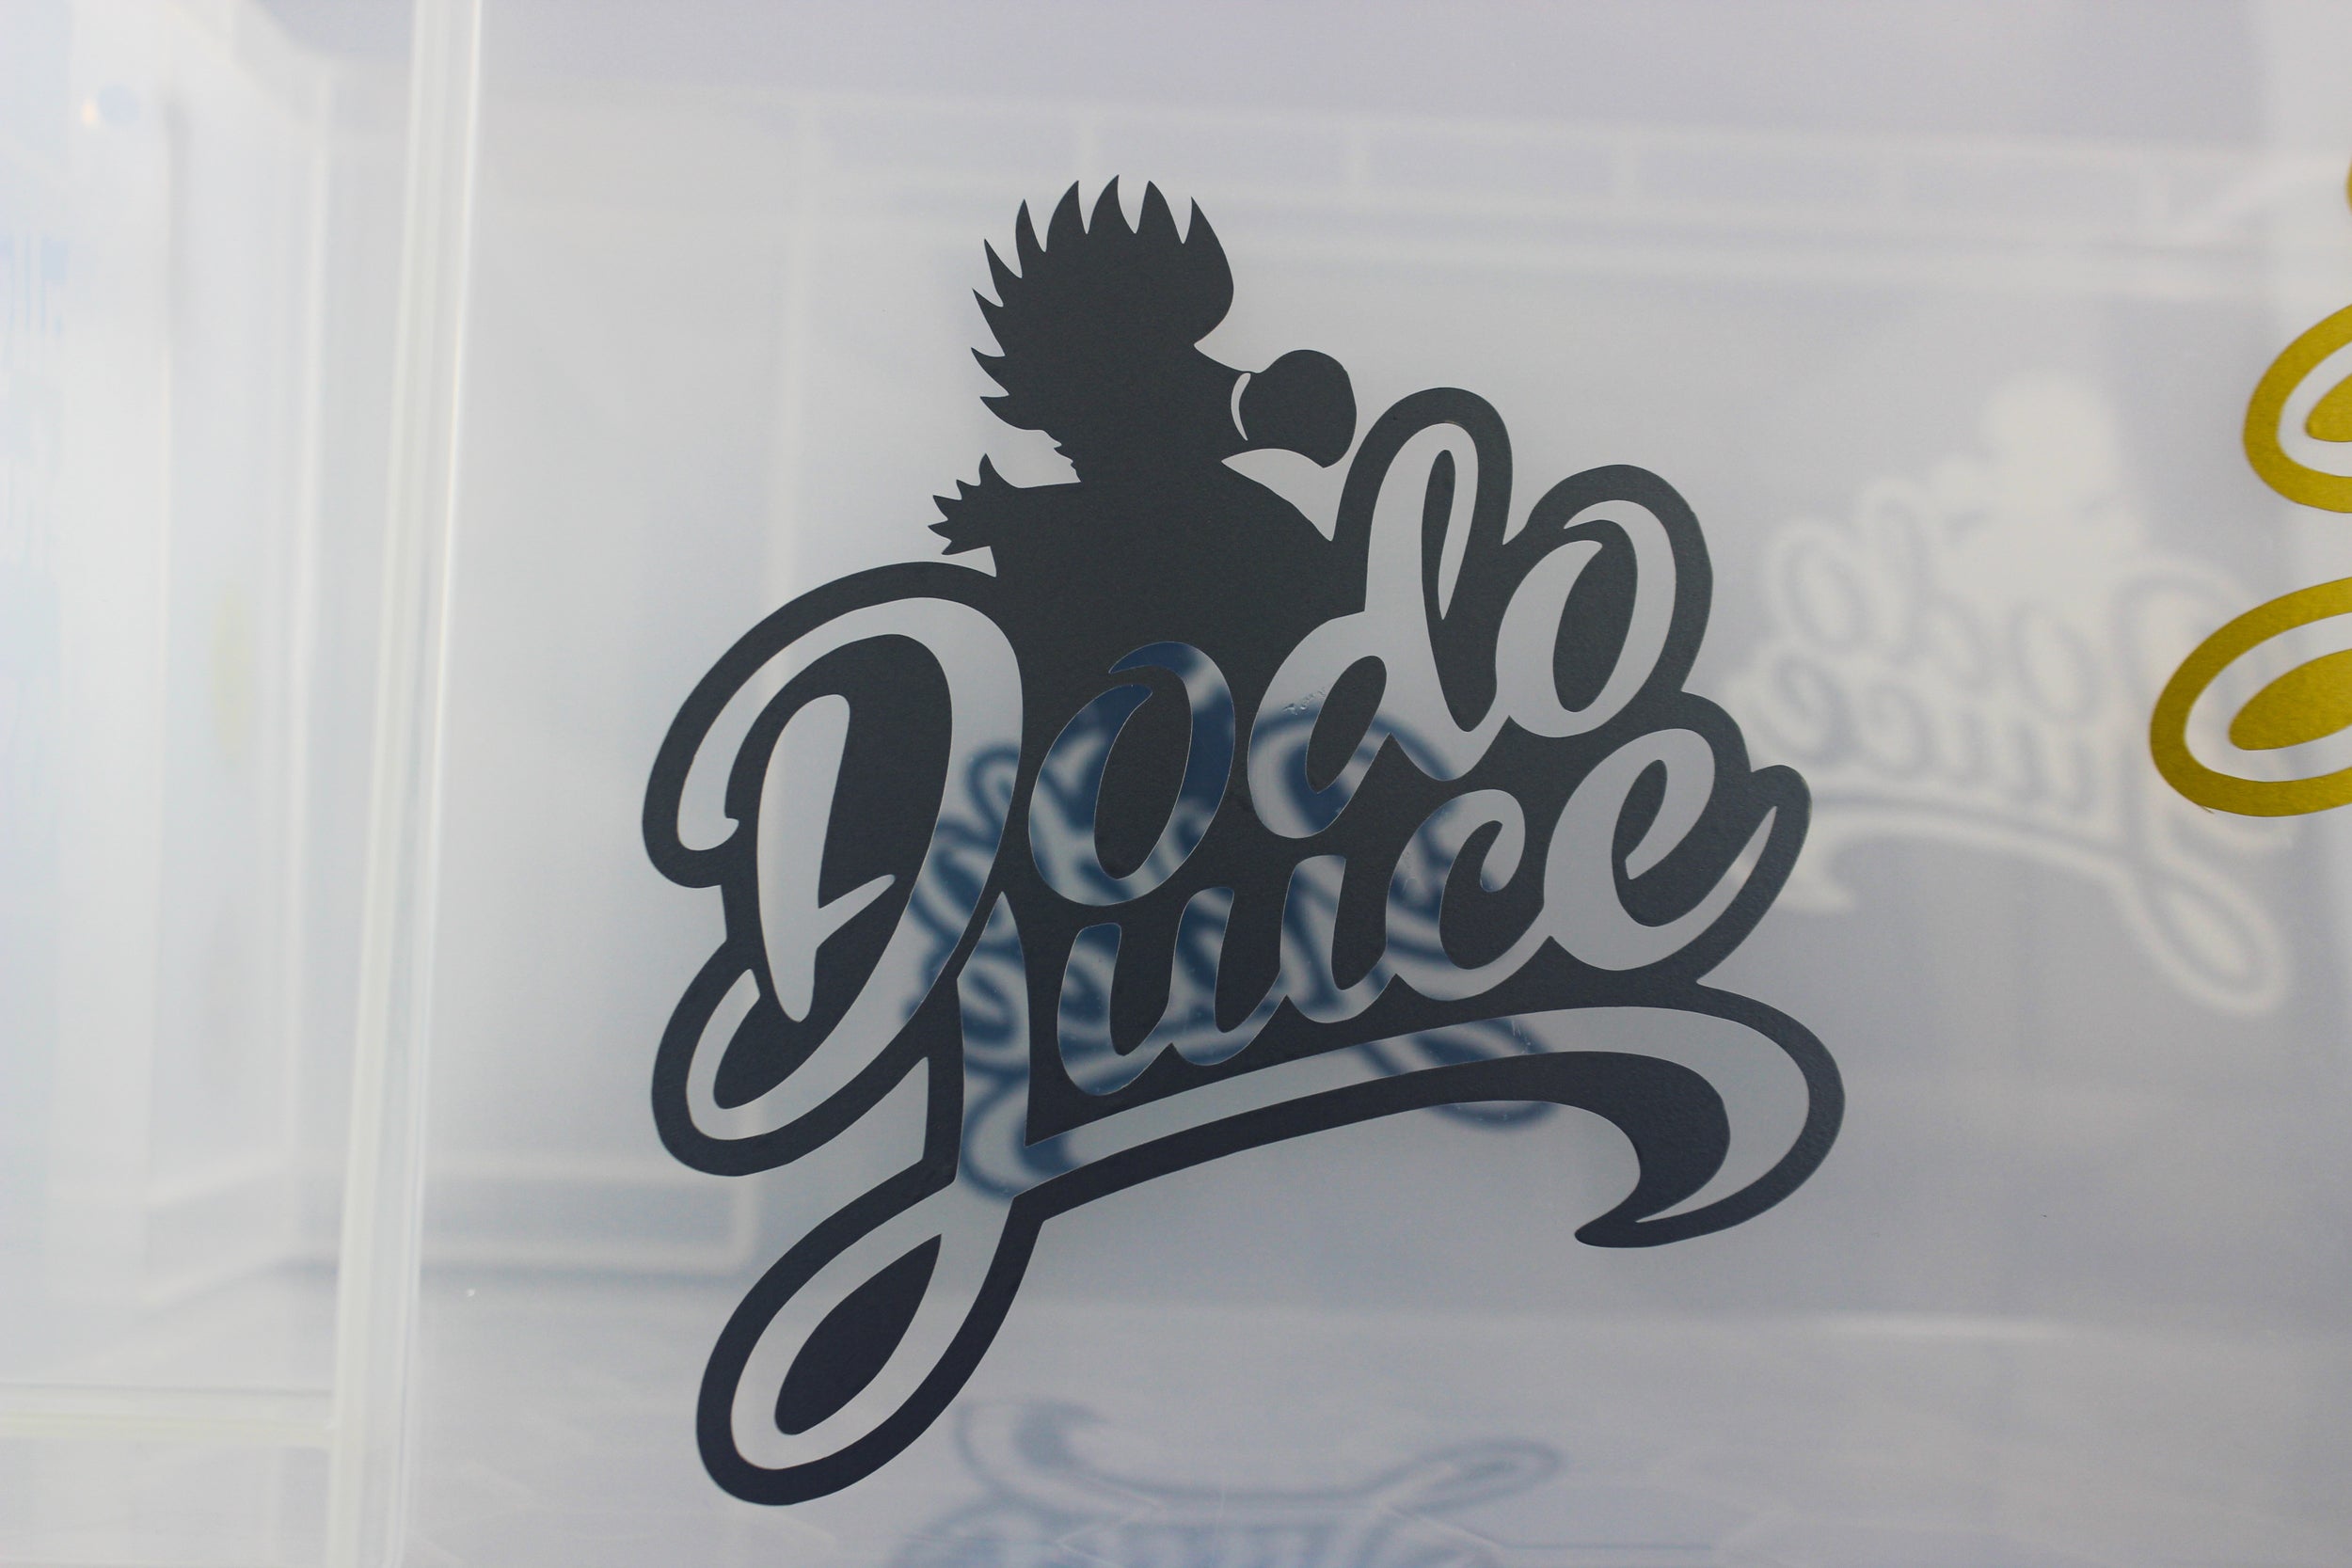 Dodo Juice REFRESH logo with Mr Skittles cut vinyl solid colour (black/white/silver/gold) HS 4911990000